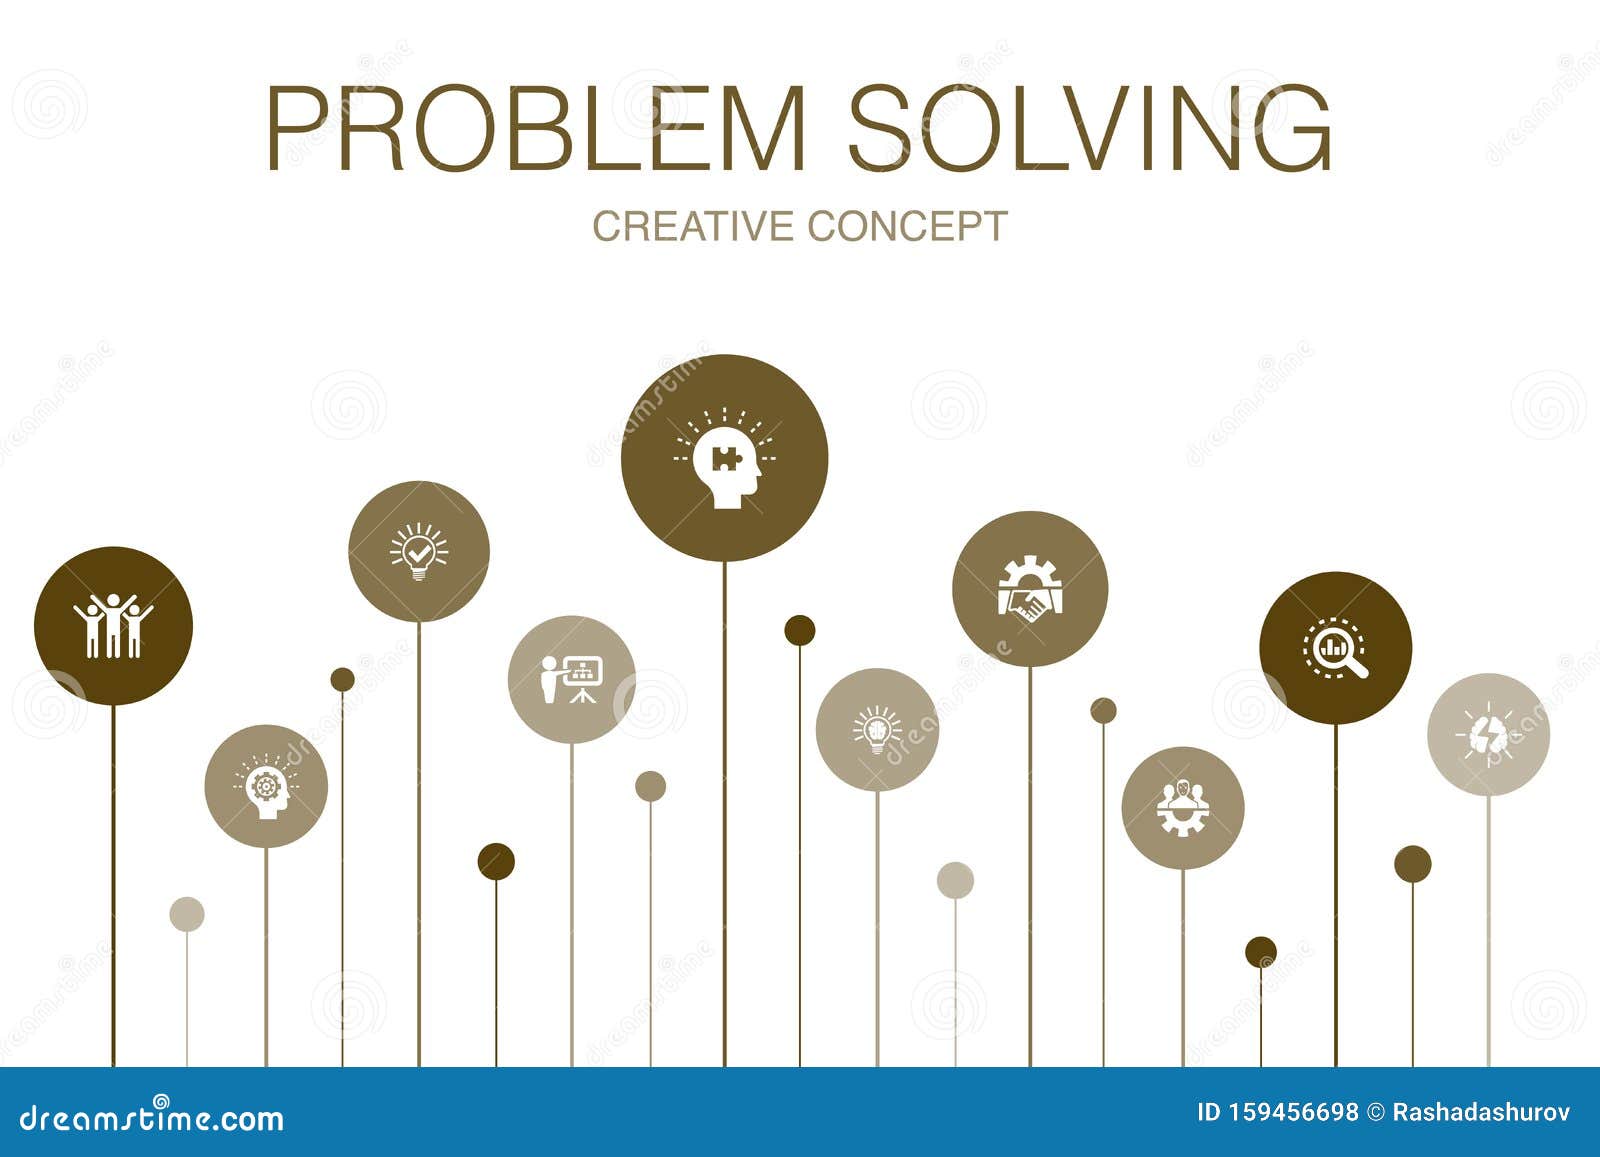 the two common strategies of problem solving are brainstorming and mapping